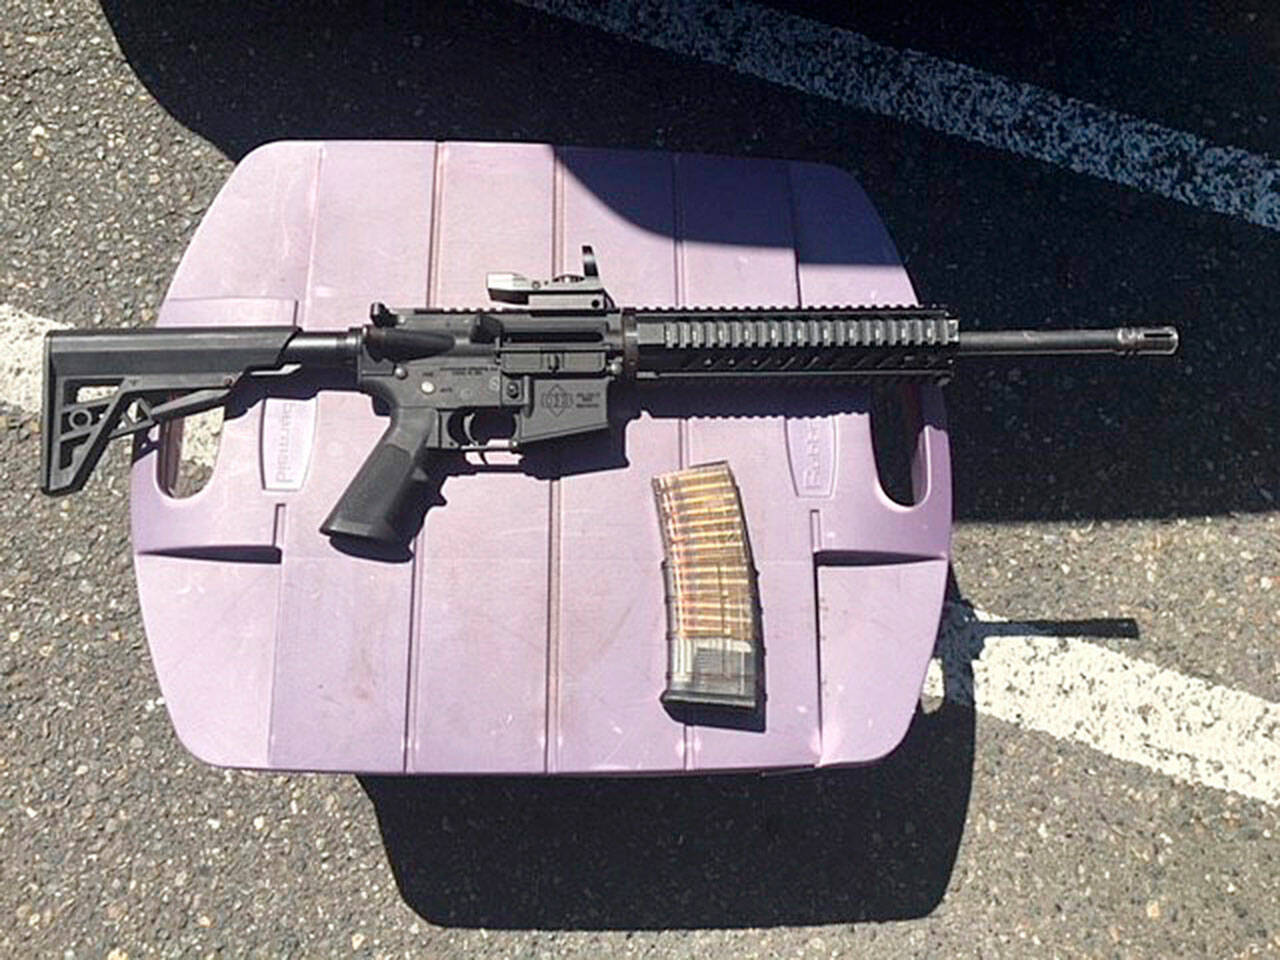 AR-15 rifle and a loaded magazine that were recovered from a suspect in a 2018 shooting incident at the Kent Station parking garage. File photo courtesy of King County Sheriff’s Office